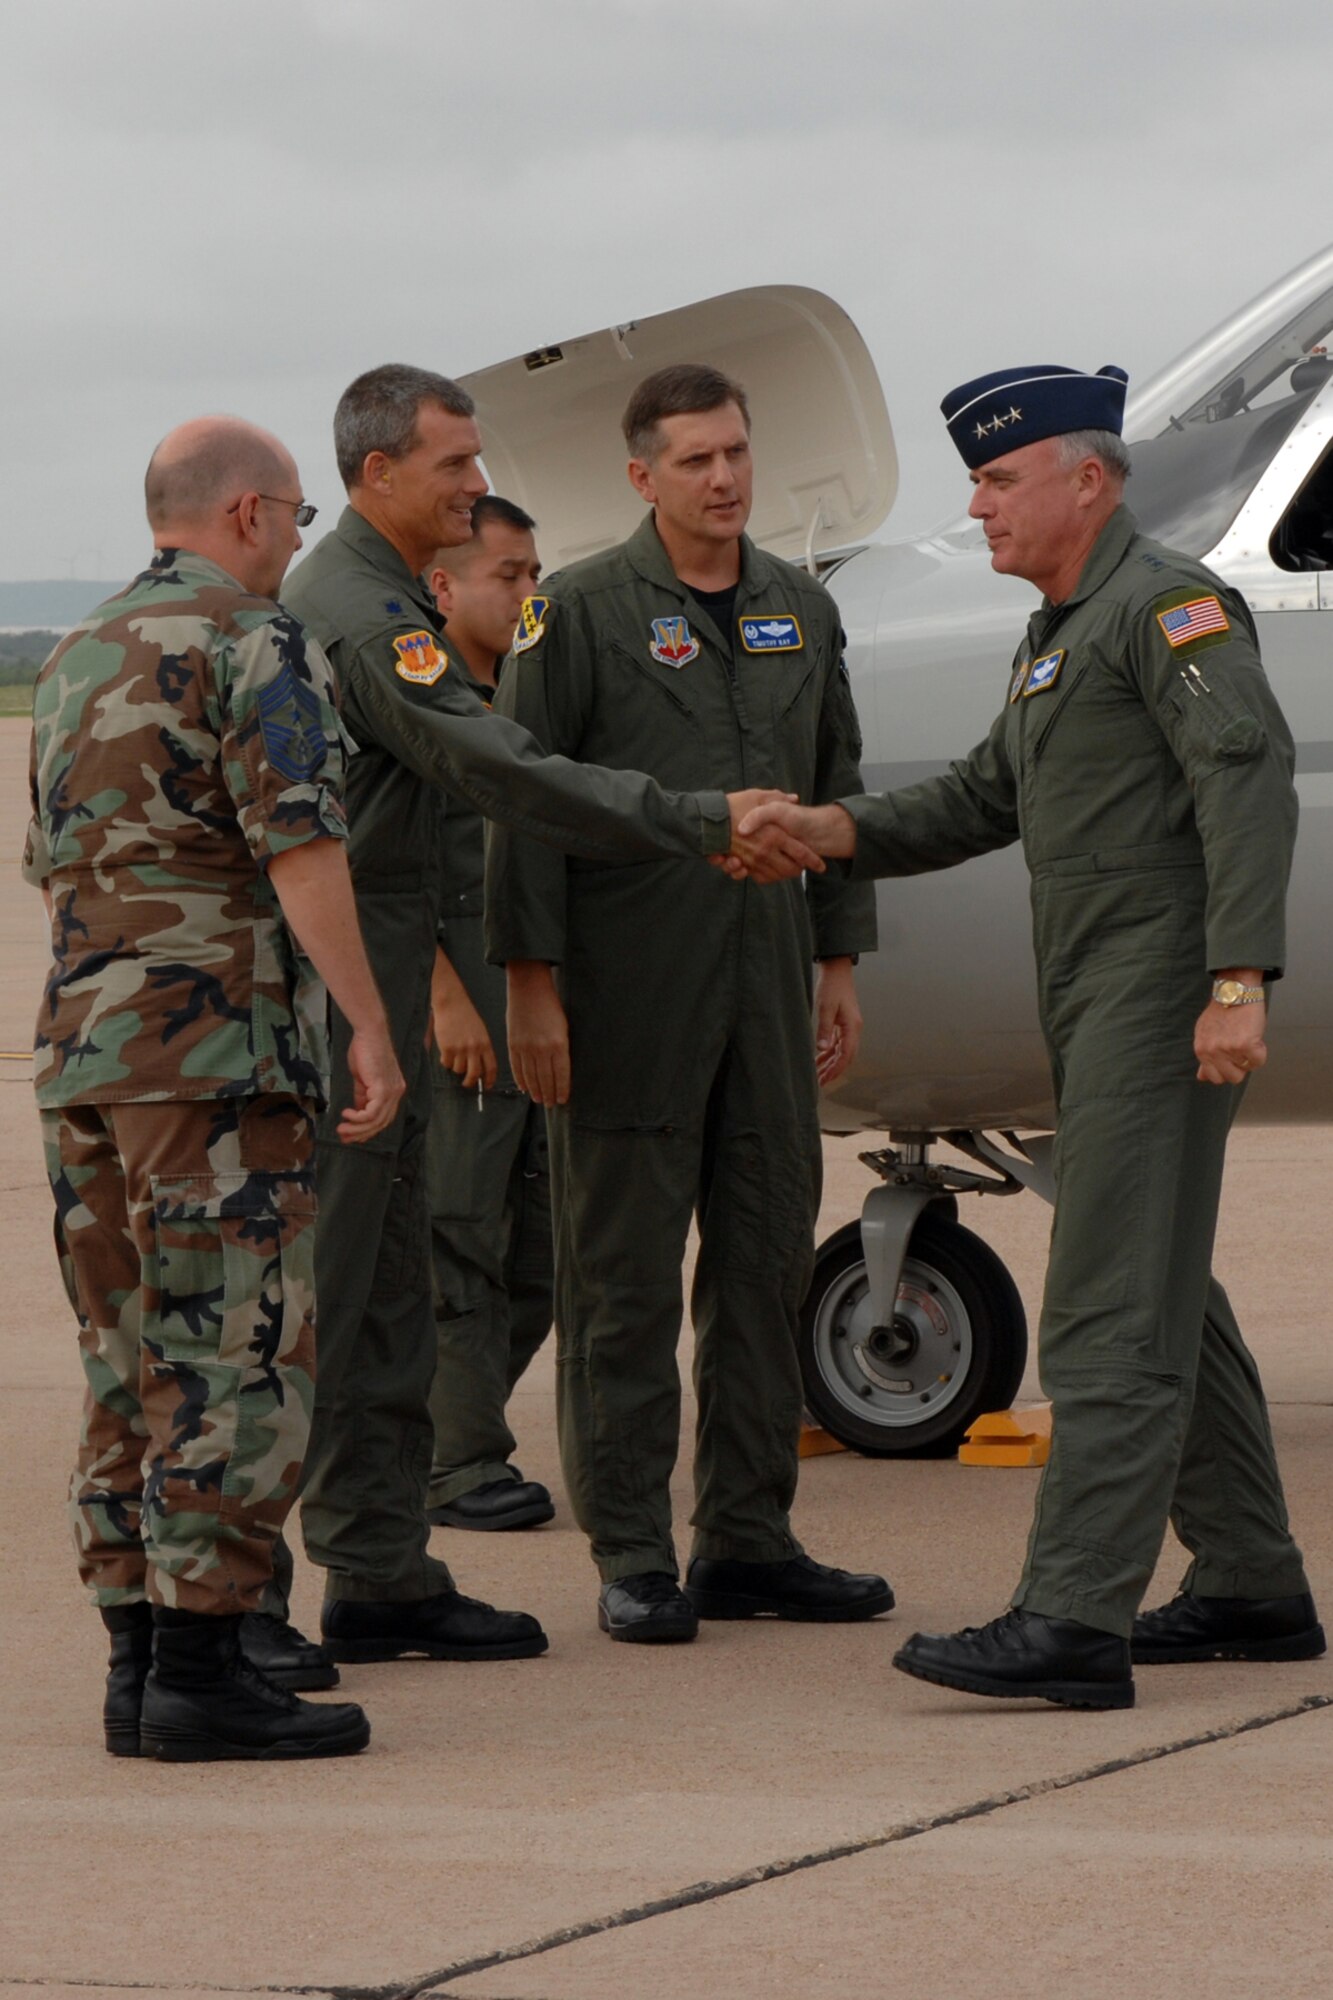 Dyess Air Force Base, Texas-- Lt. Gen. Howie Chandler, Deputy Chief of Staff for Operations, Plans and Requirements, Headquarters U.S. Air Force, Washington, D.C., is welcomed to Dyess by Col. Timothy Ray, 7th Bomb Wing commander, Lt.Col Jerry Goff, 317th Airlift Group deputy commander, and Chief Master Sgt. David Goldie, 7th BW command chief. General Chandler was given the opportunity to fly in a C-130 and B-1 during his visit here. (U.S. Air Force photo by SrA Courtney Garrard)